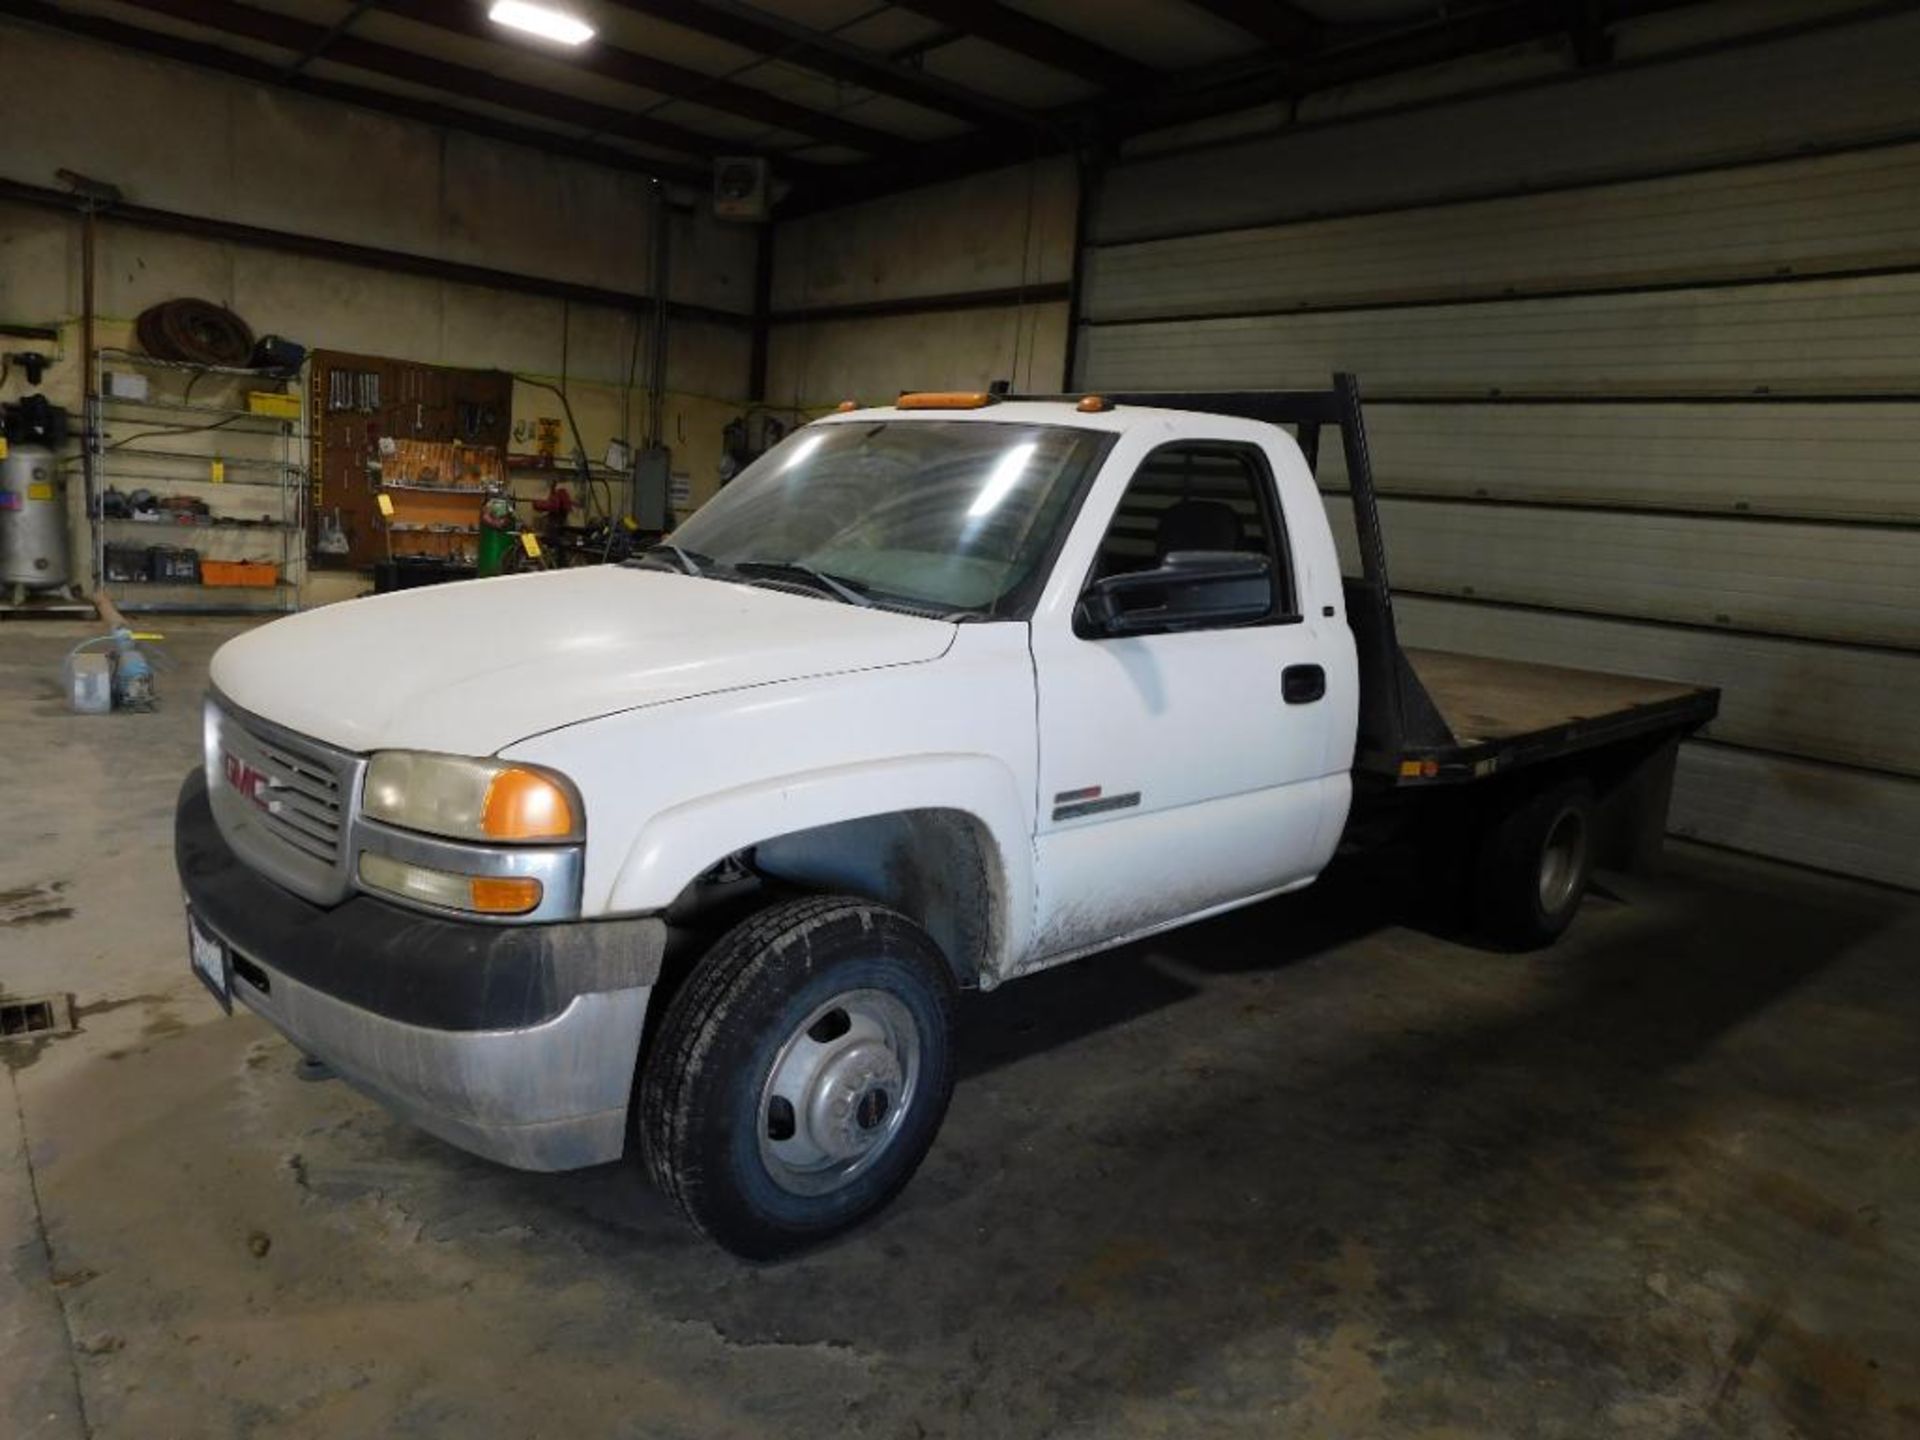 2001 GMC 3500 4-Wheel Drive Flat Bed, Dually Duramax Diesel Engine, Auto Trans, 94" Wide x 9' Steel - Image 2 of 8